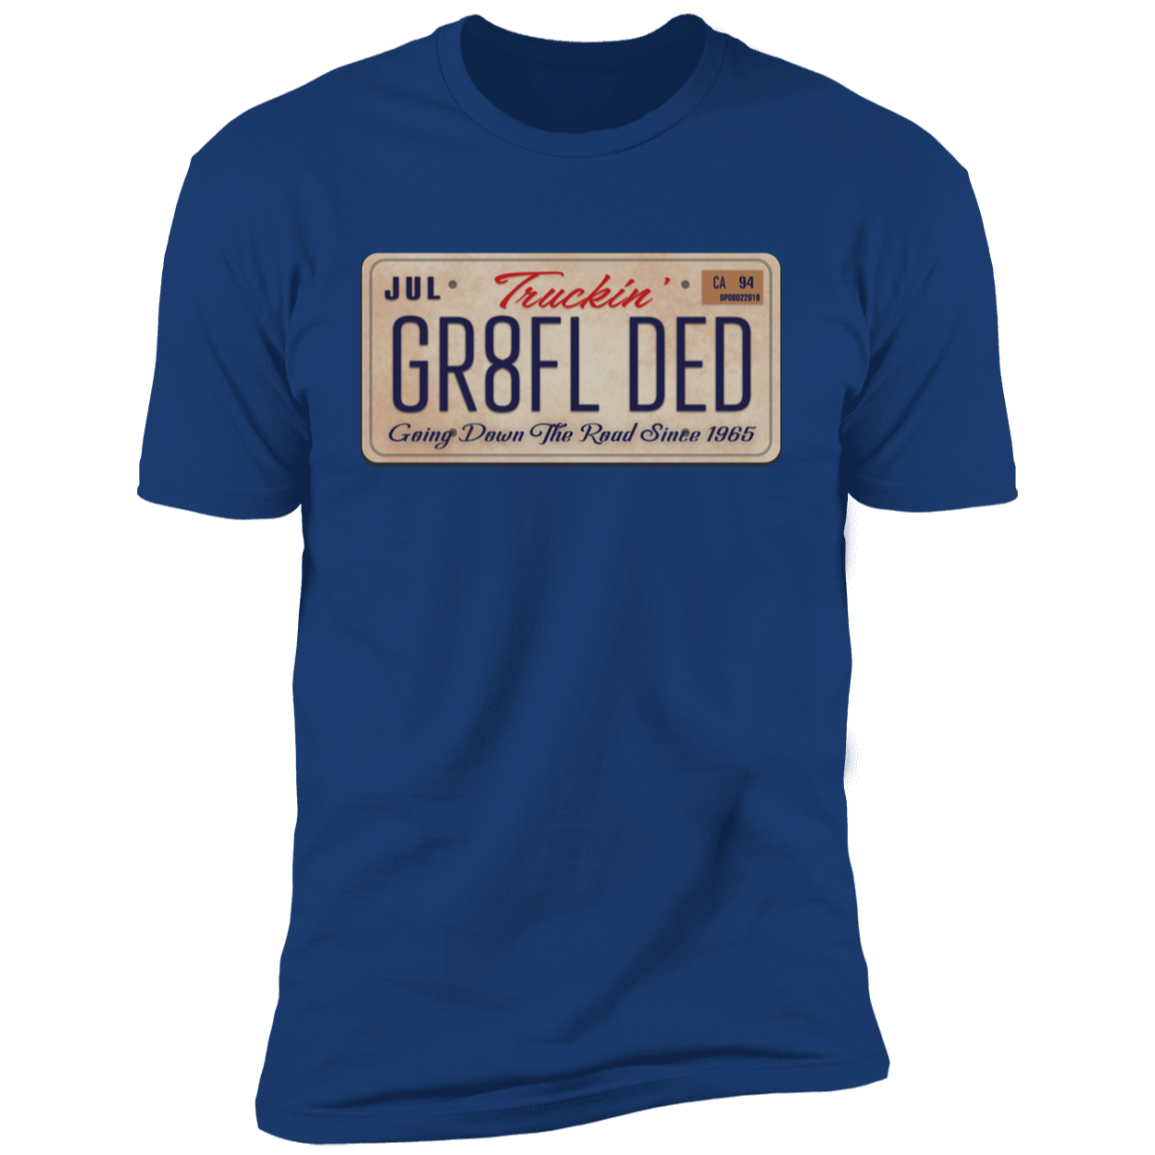 GR8FL DED license plate, going down the road since 1965, The Grateful  inspired T-shirt